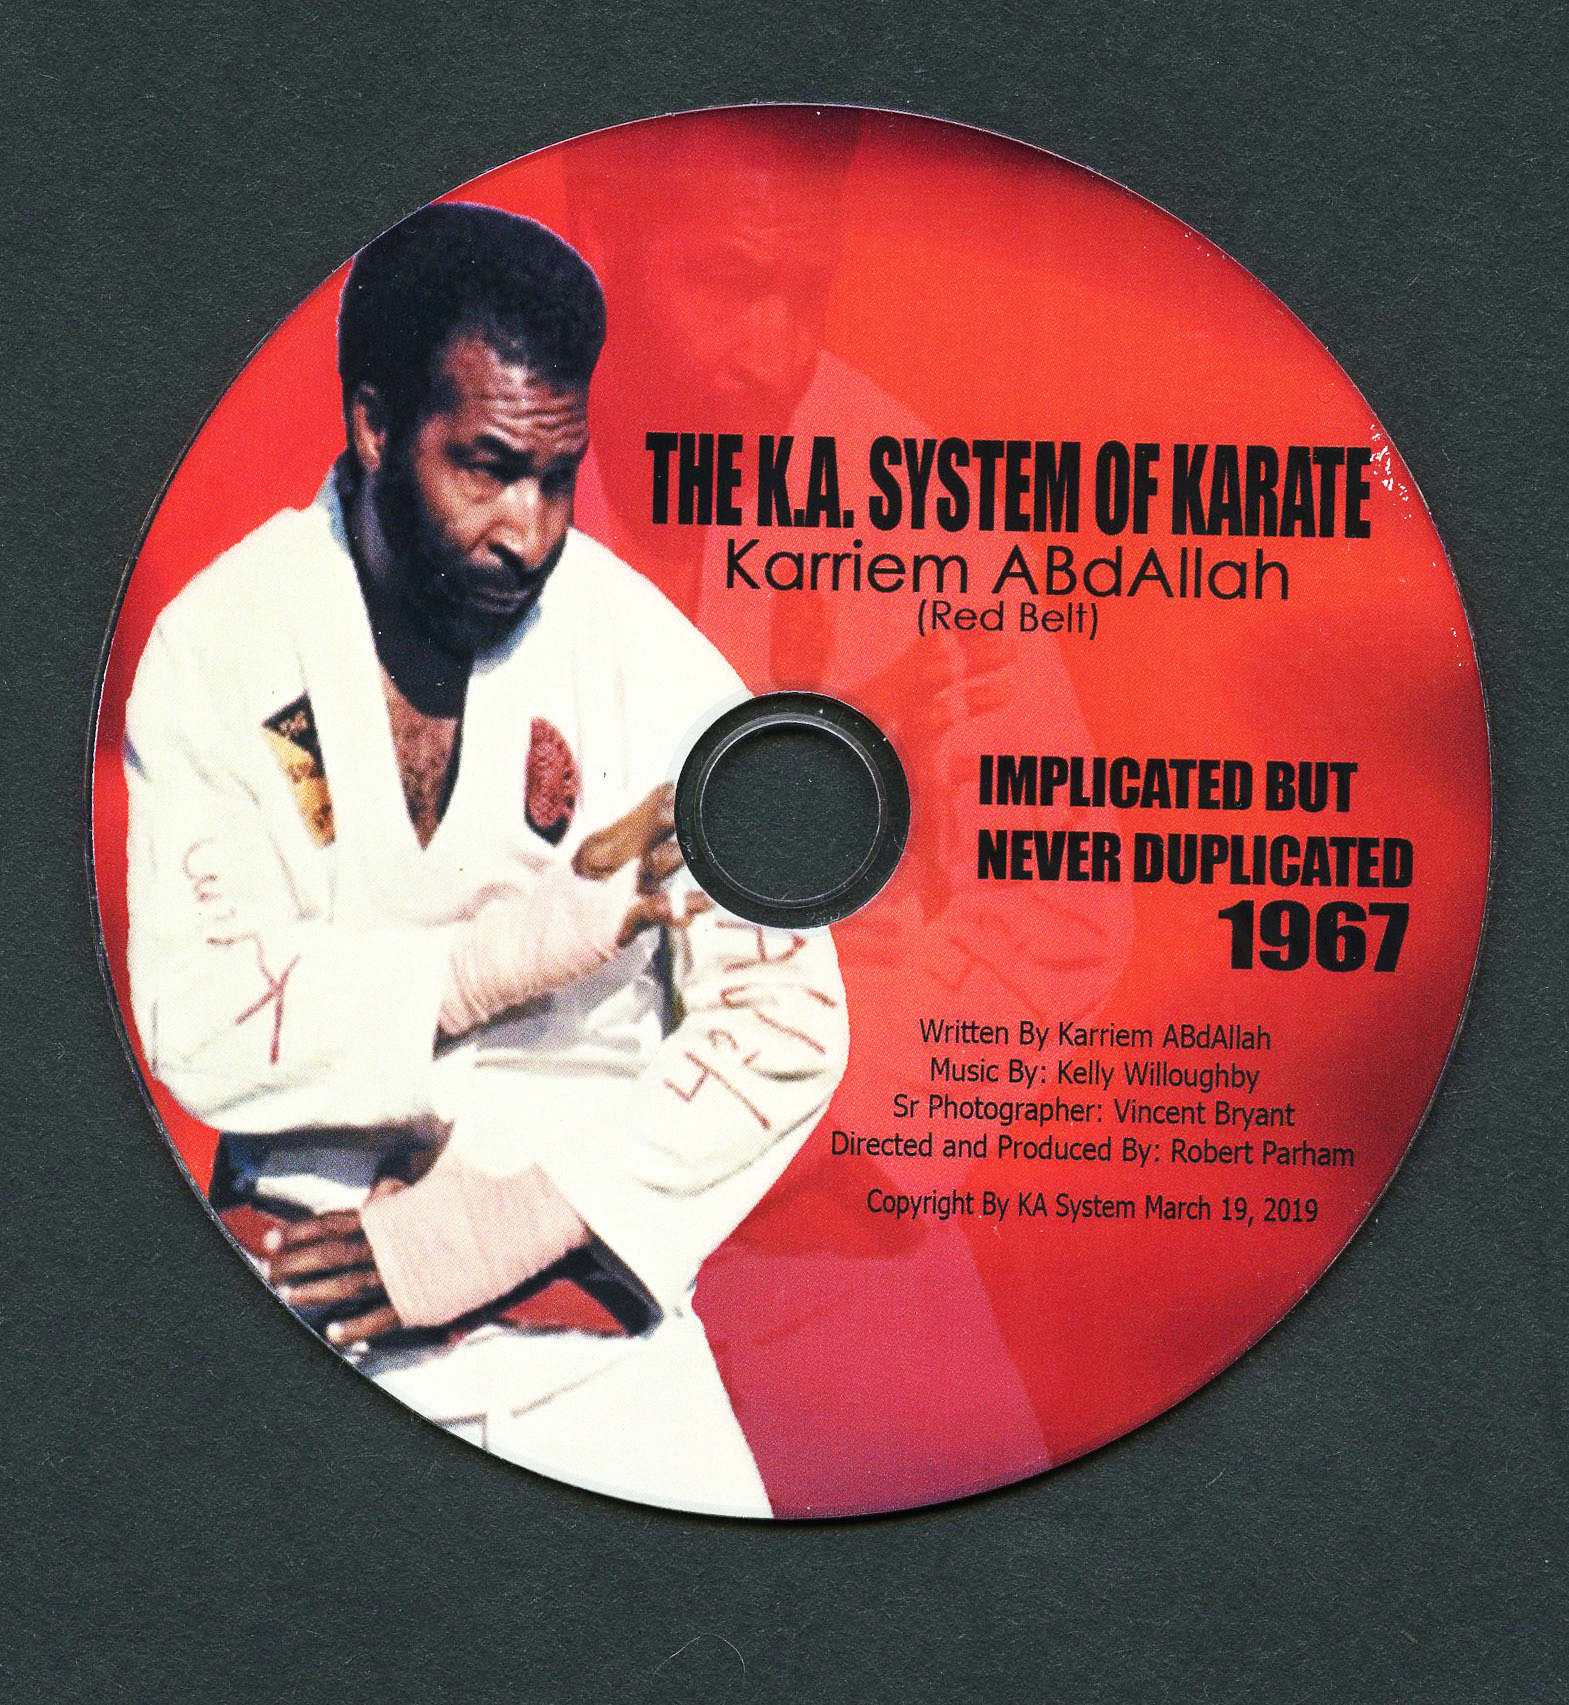 The K.A.System of karate DVD on sale $13.99 with postage $16.99 in USA. Go to Buy tickets & books for orders.